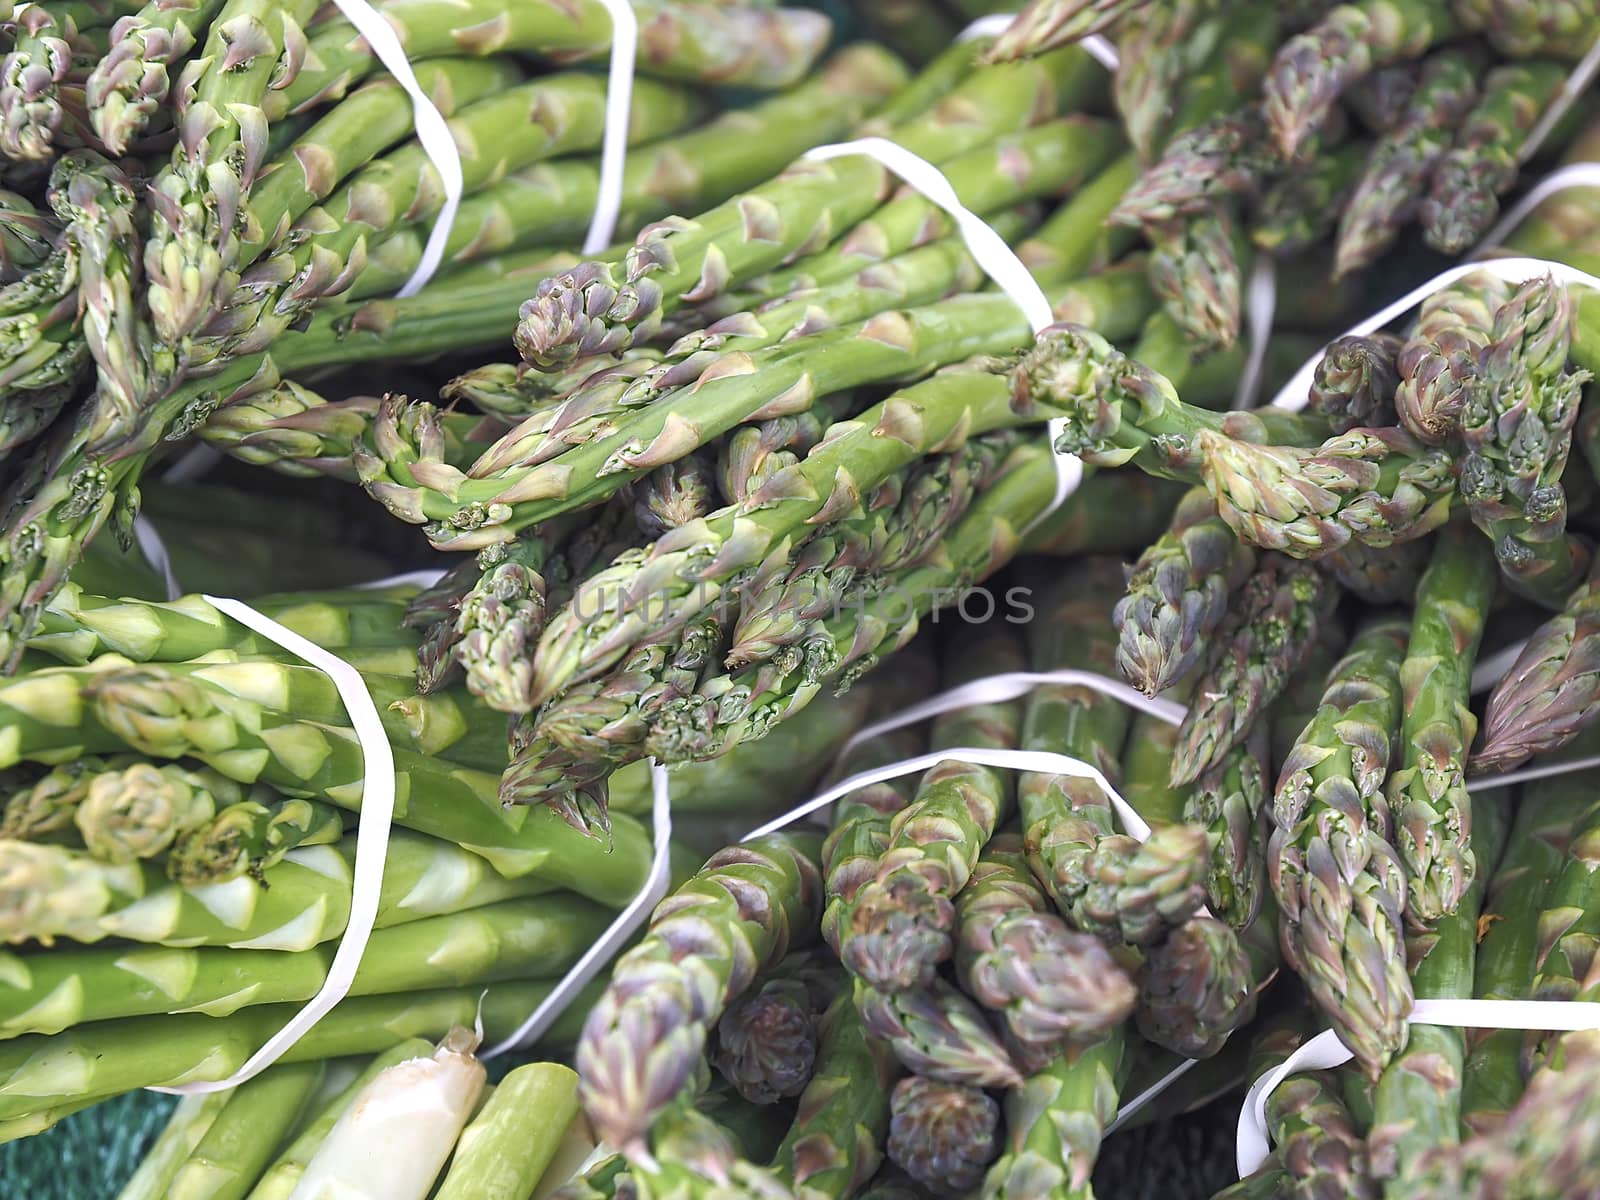 Closeup of bunches of green asparagus at a food market by Stimmungsbilder